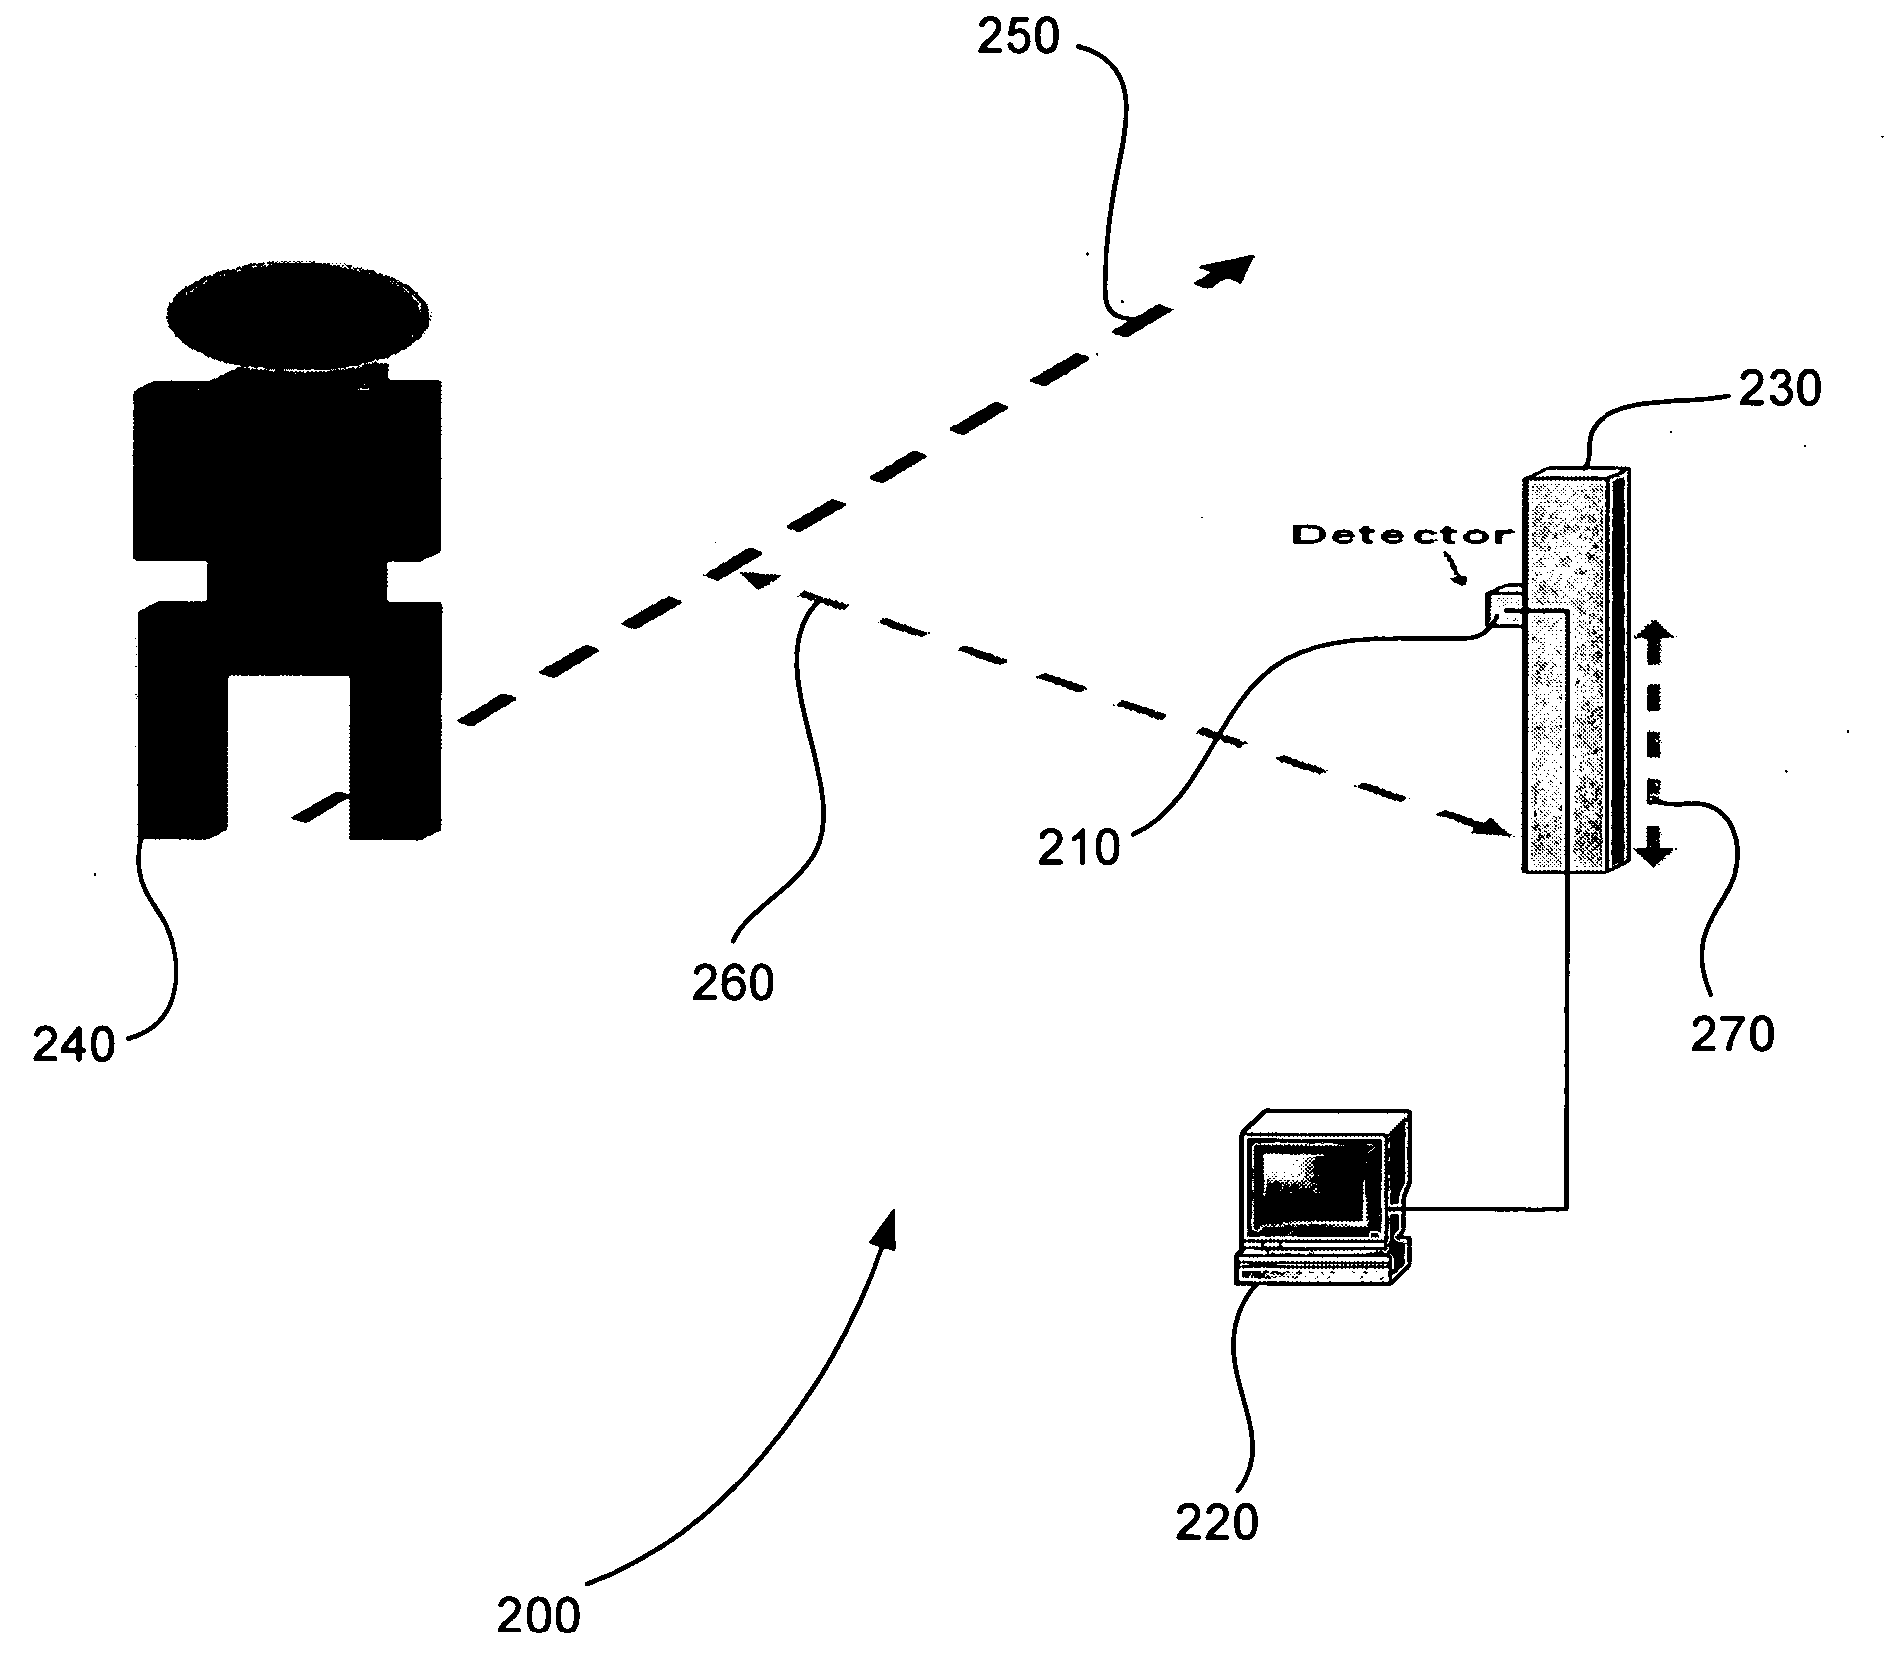 Sensor system for identifiying and tracking movements of multiple sources